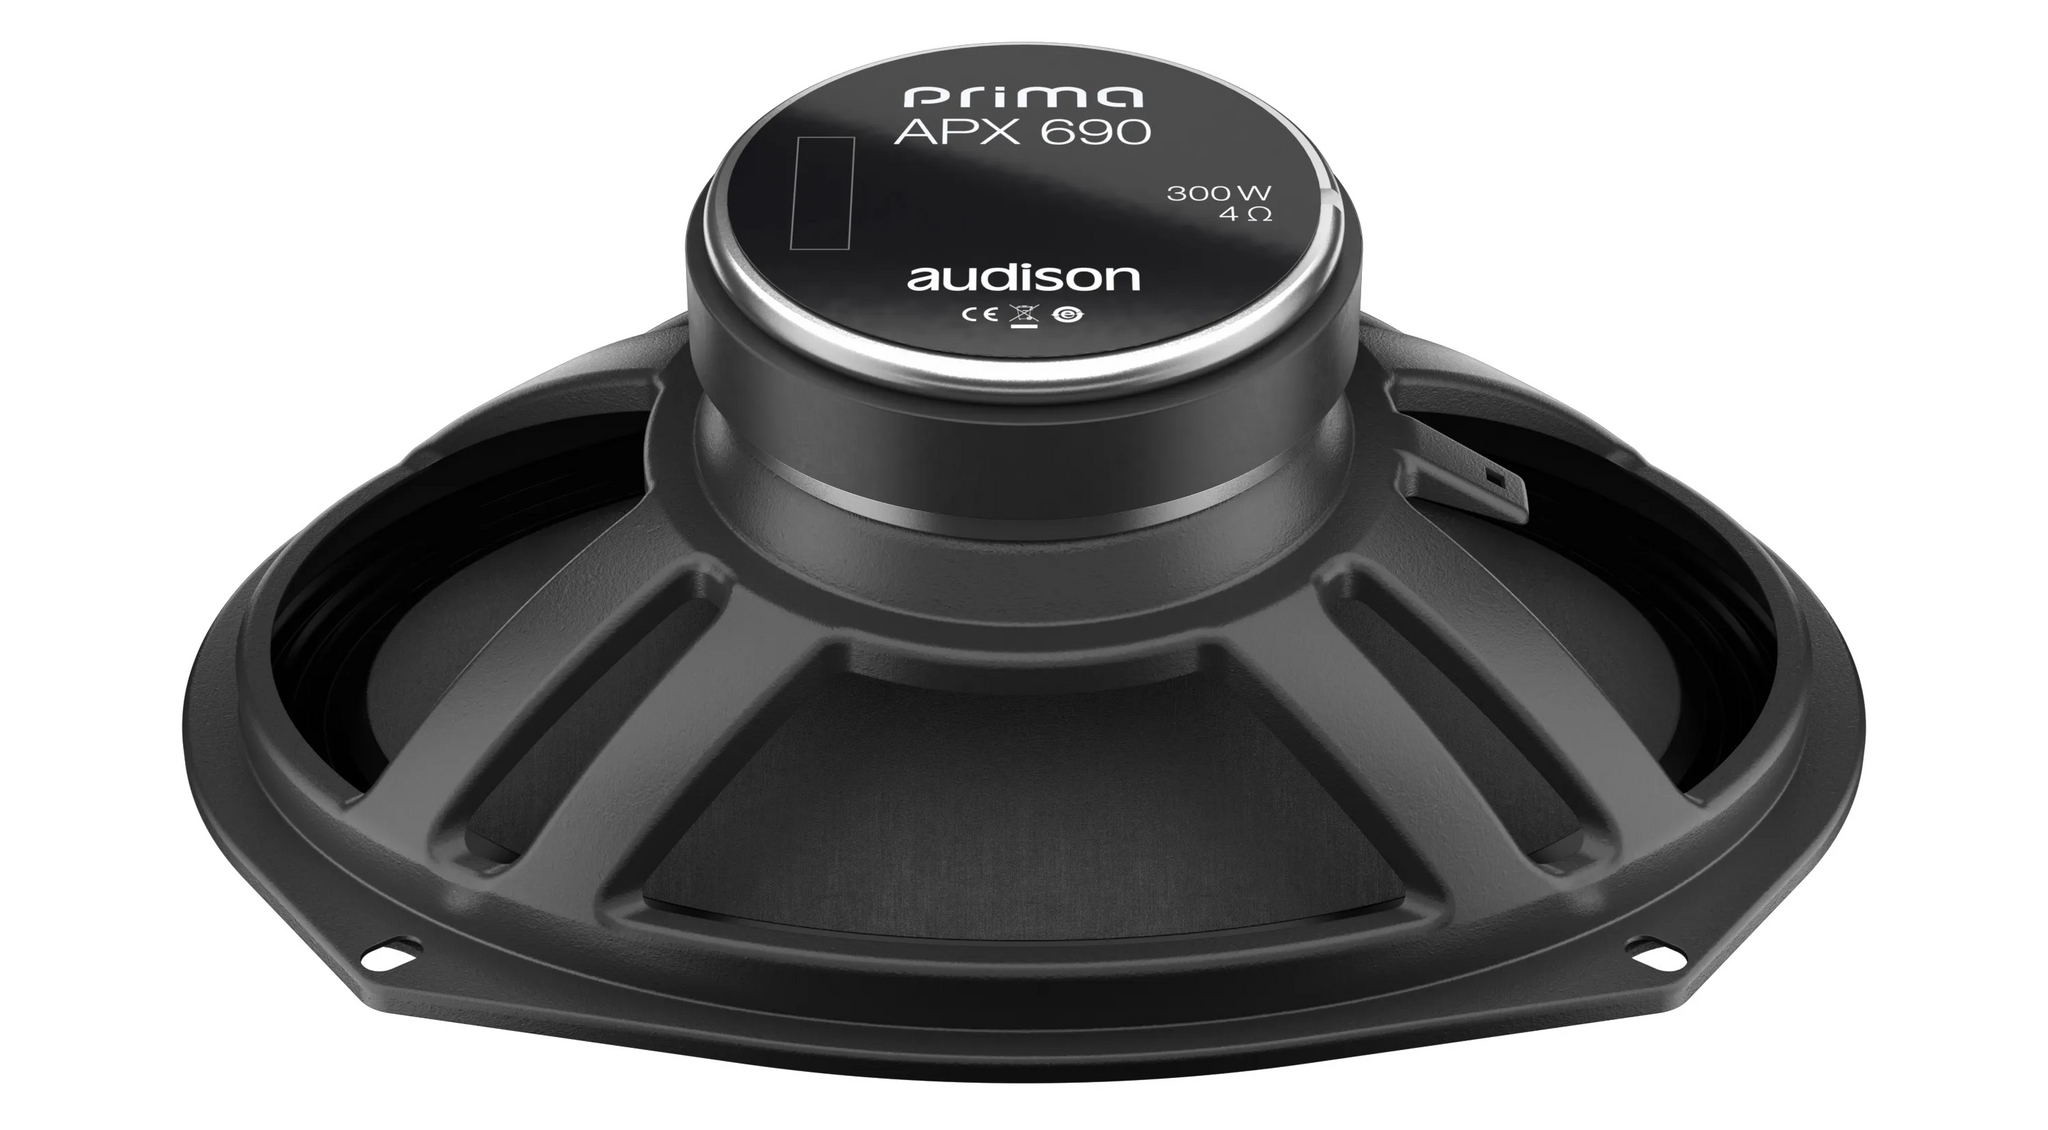 Upgrade your car's audio system to perfection with the Audison APX 690 Coaxial Speakers, delivering a consistent in-phase response and featuring an exclusive shallow Triple Wave profile for maximum excursion linearity.